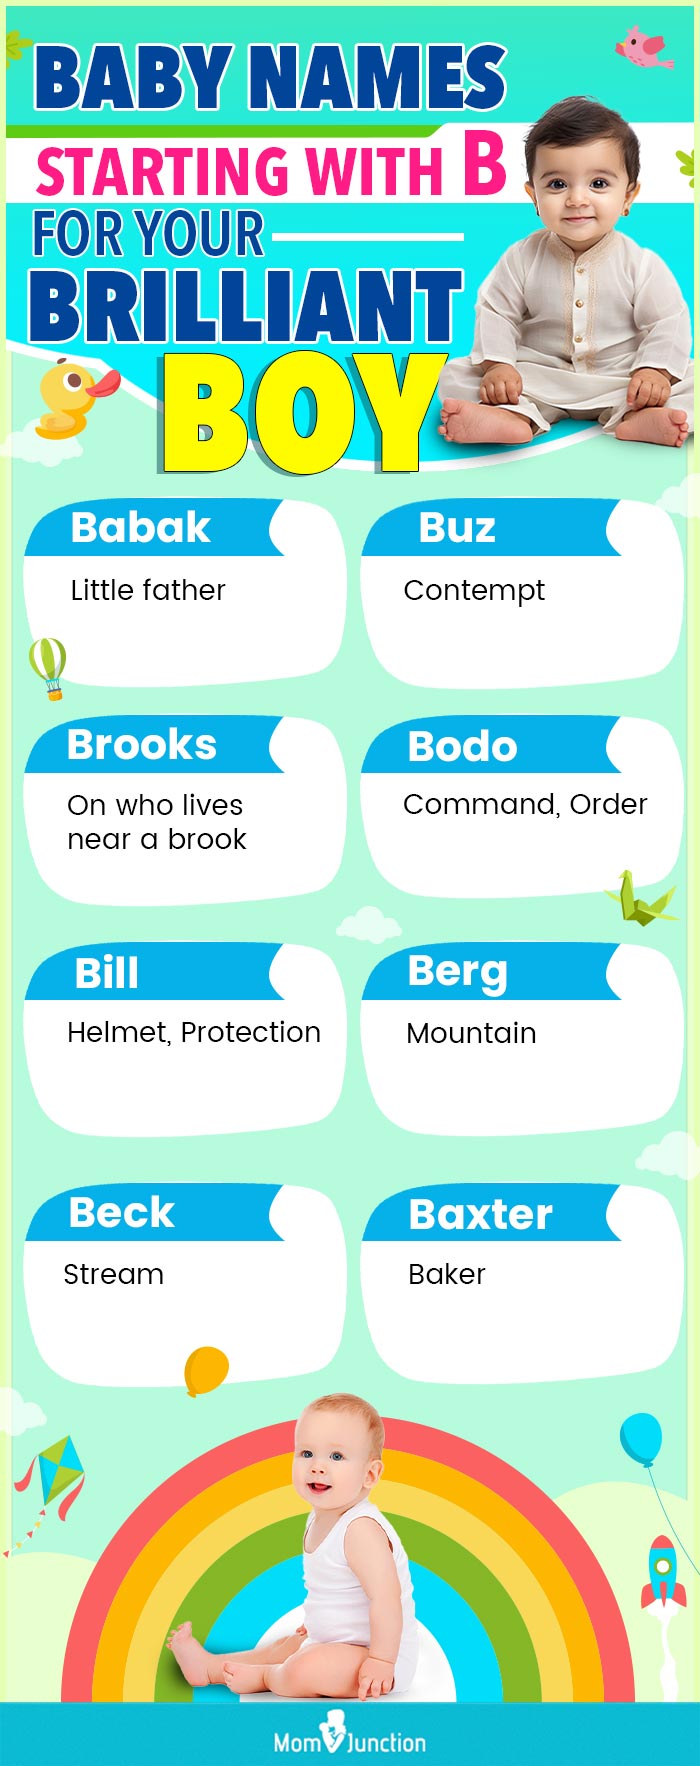 baby names starting with b for your brilliant boy (infographic)